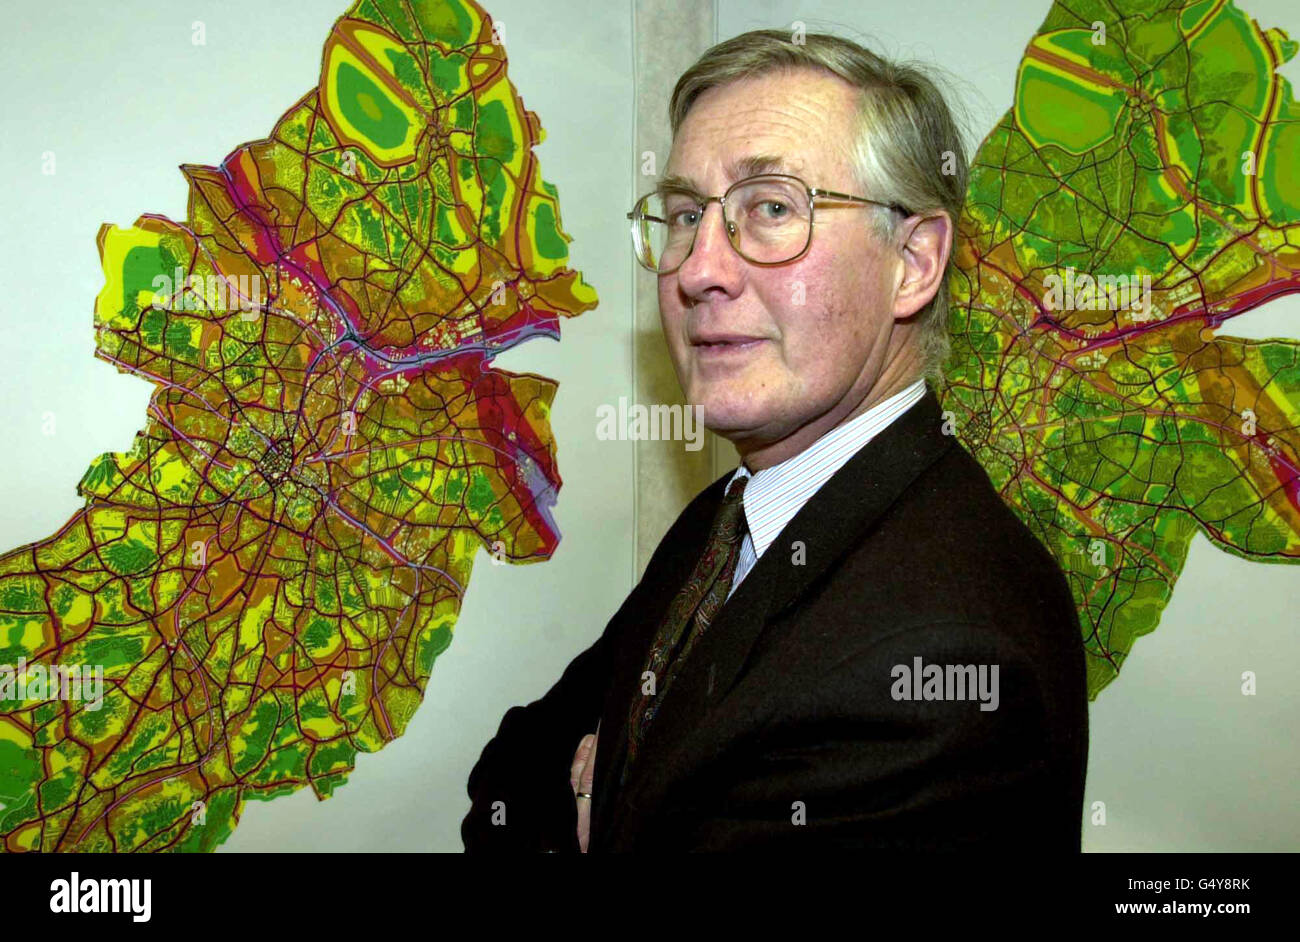 Britains first noise map of a city has been launched at the NEC in Birmingham by the Environment Minister Michael Meacher. The map from Birmingham City Council details the city's noise levels during the day and at night. * Picture shows Michael Meacher with noise maps of Birmingham by day and by night (right). Stock Photo